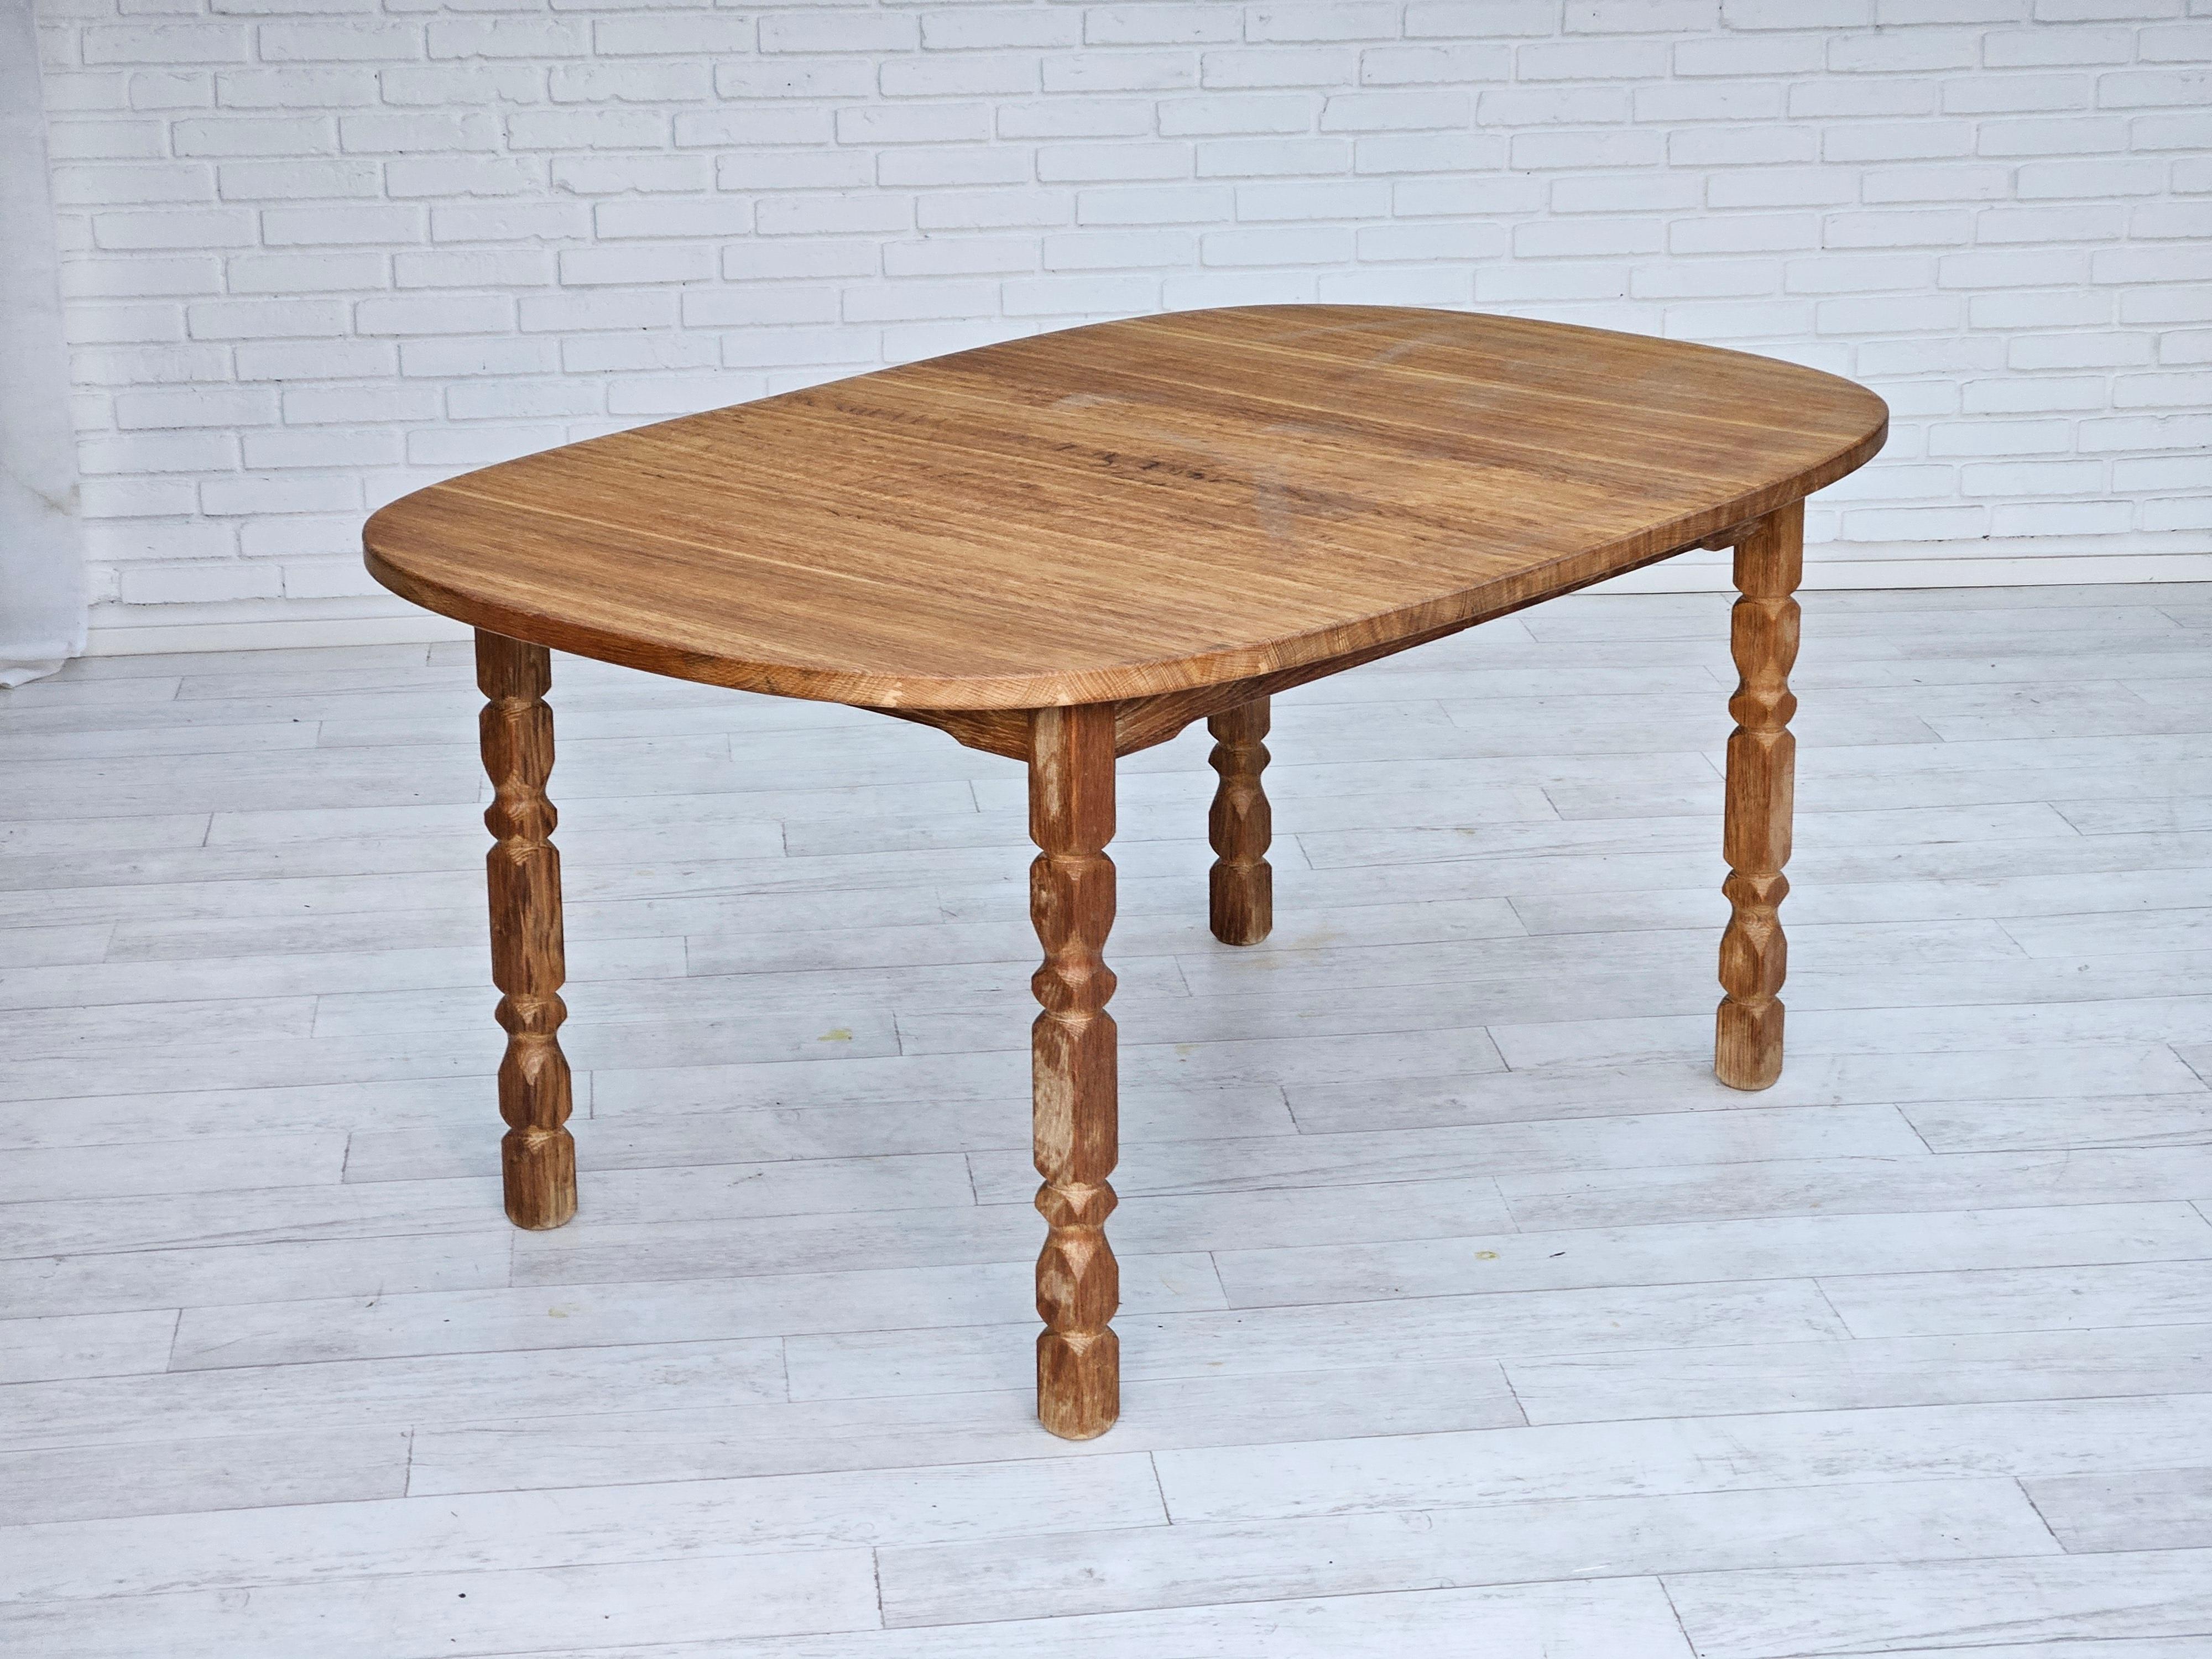 1970s, Danish oak wood dining table in oval shape. Solid oak wood. Original very good condition. Removable legs. Manufactured by Danish furniture manufacturer in about 1970s.